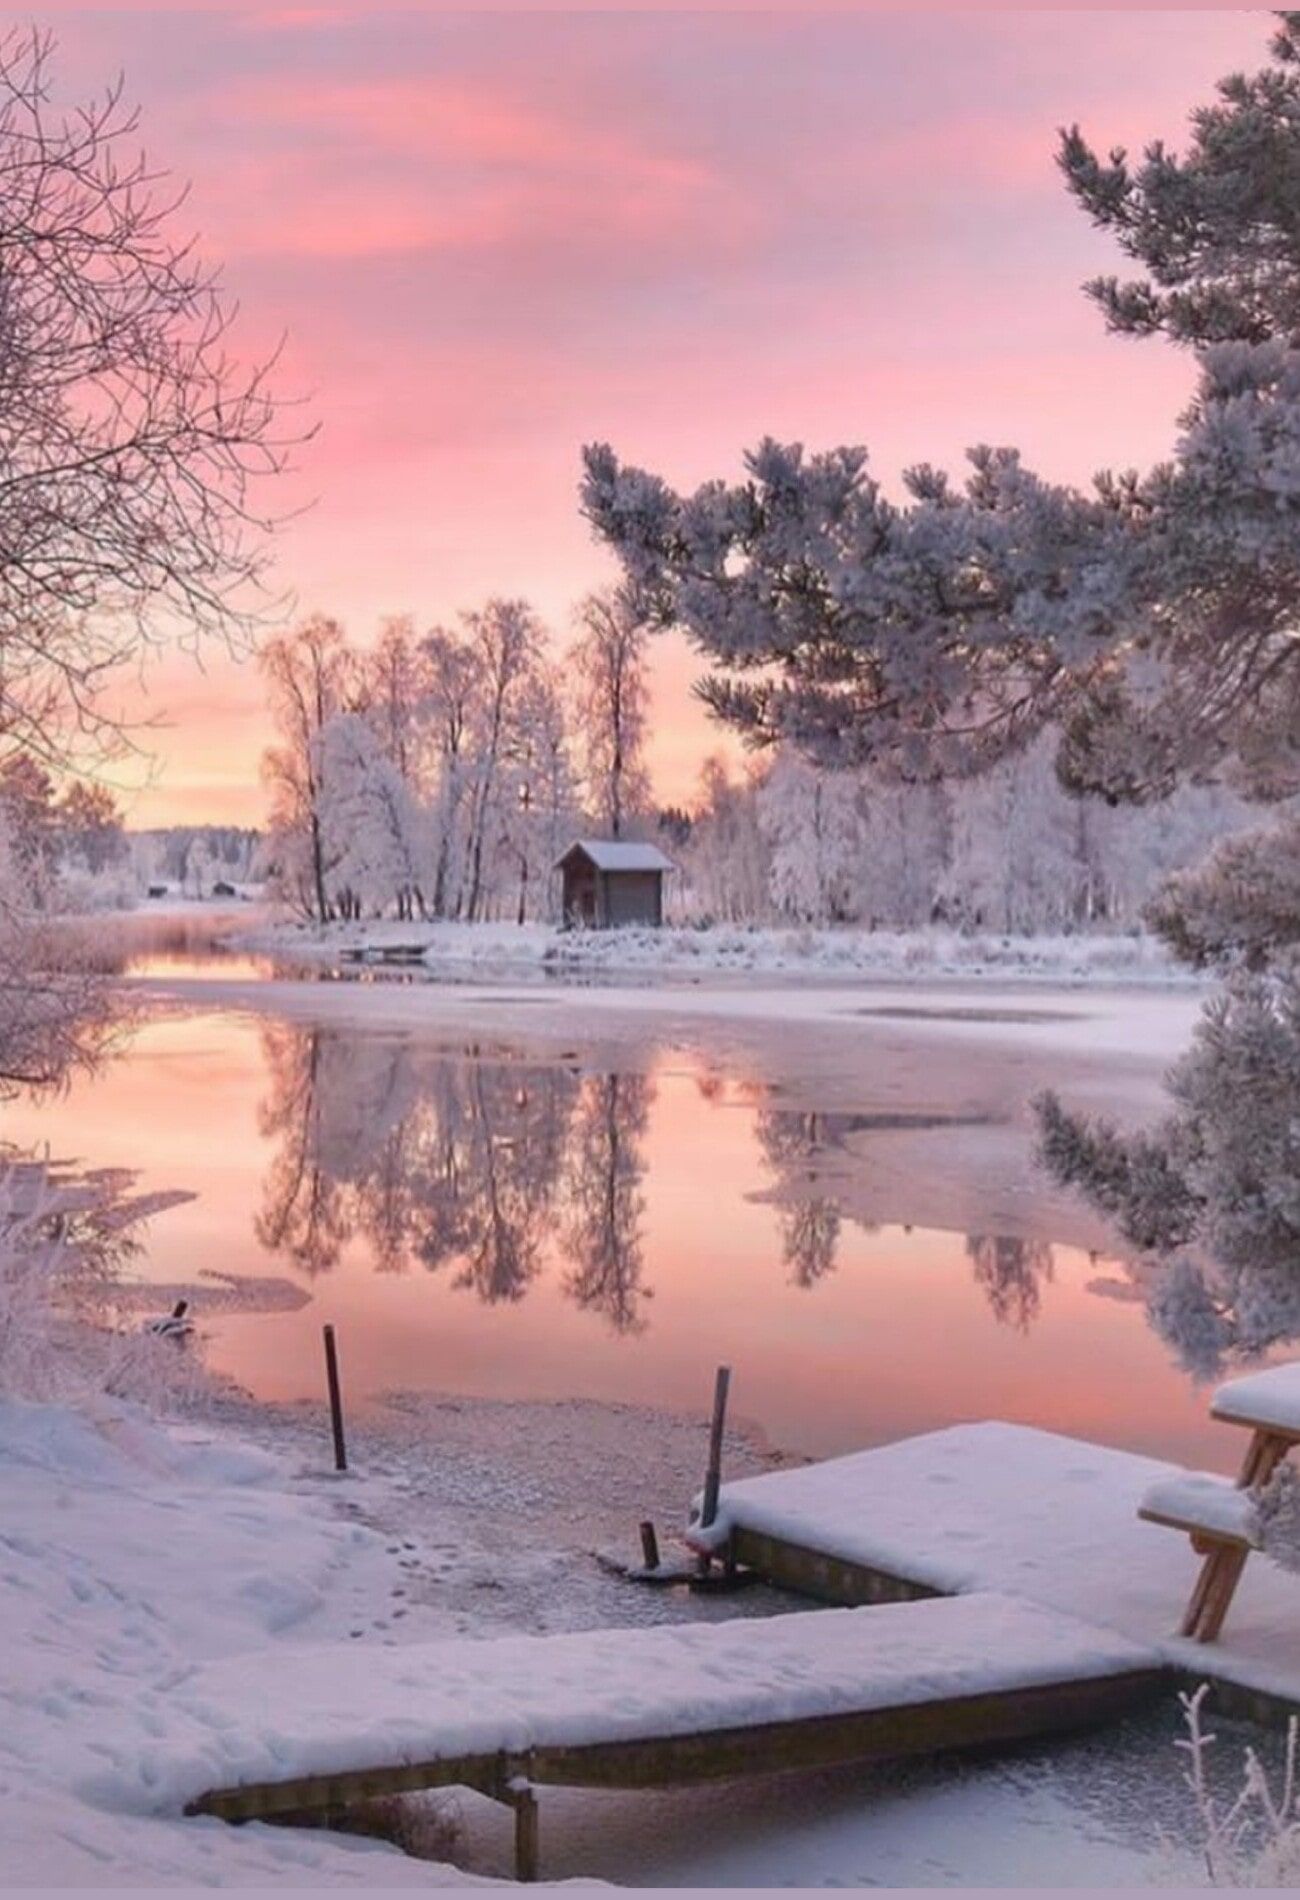 A frozen lake under a pink sky with a small house in the background. - Snow, winter